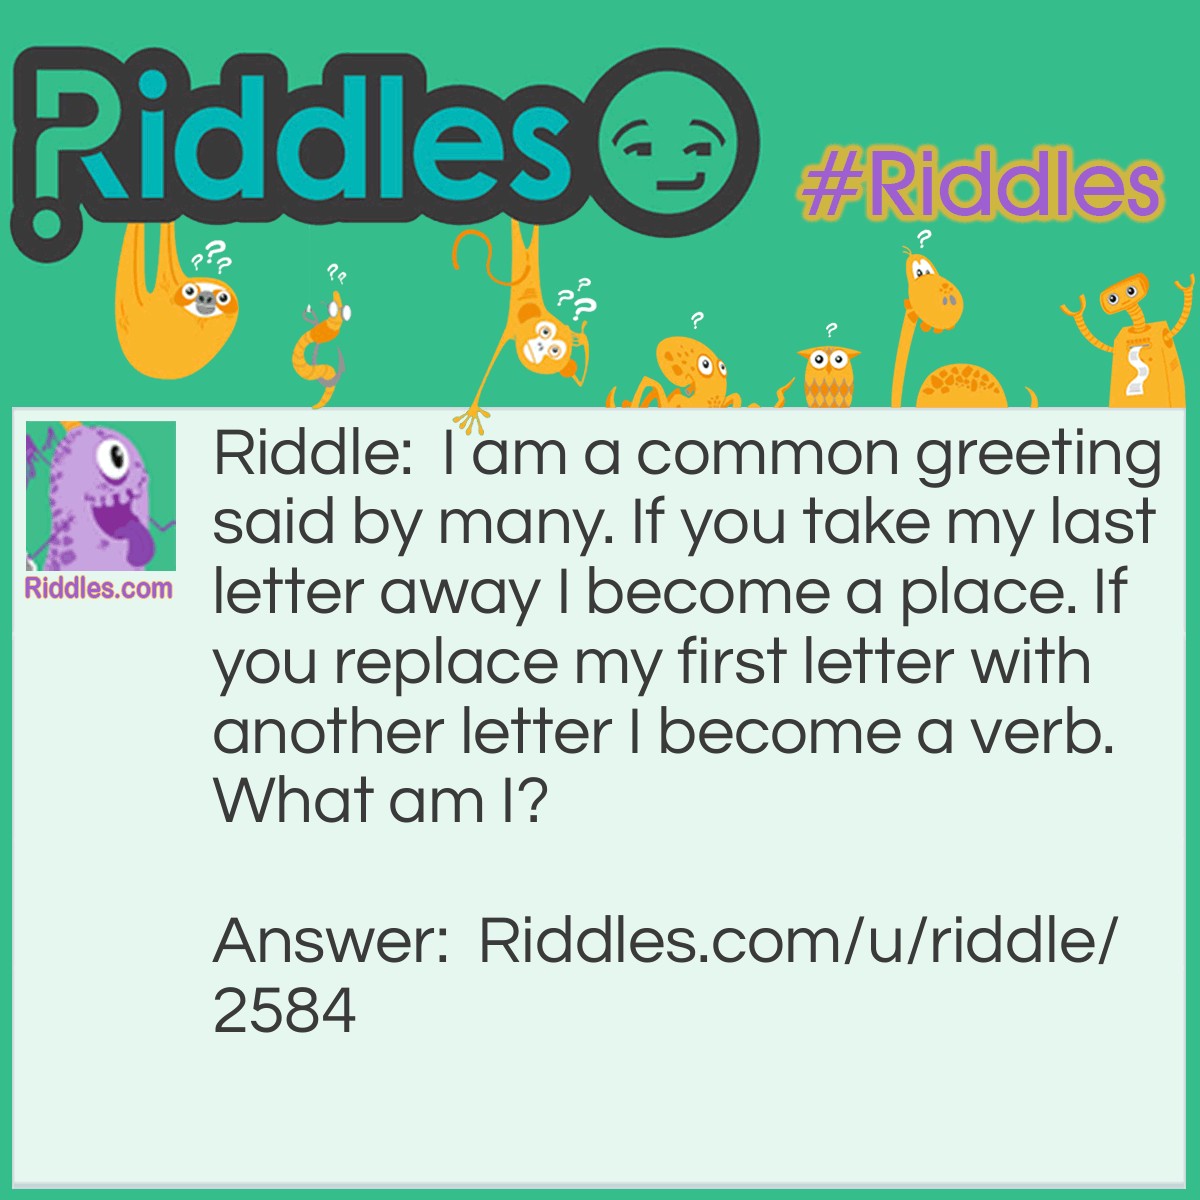 Riddle: I am a common greeting said by many. If you take my last letter away I become a place. If you replace my first letter with another letter I become a verb. What am I? Answer: Hello.